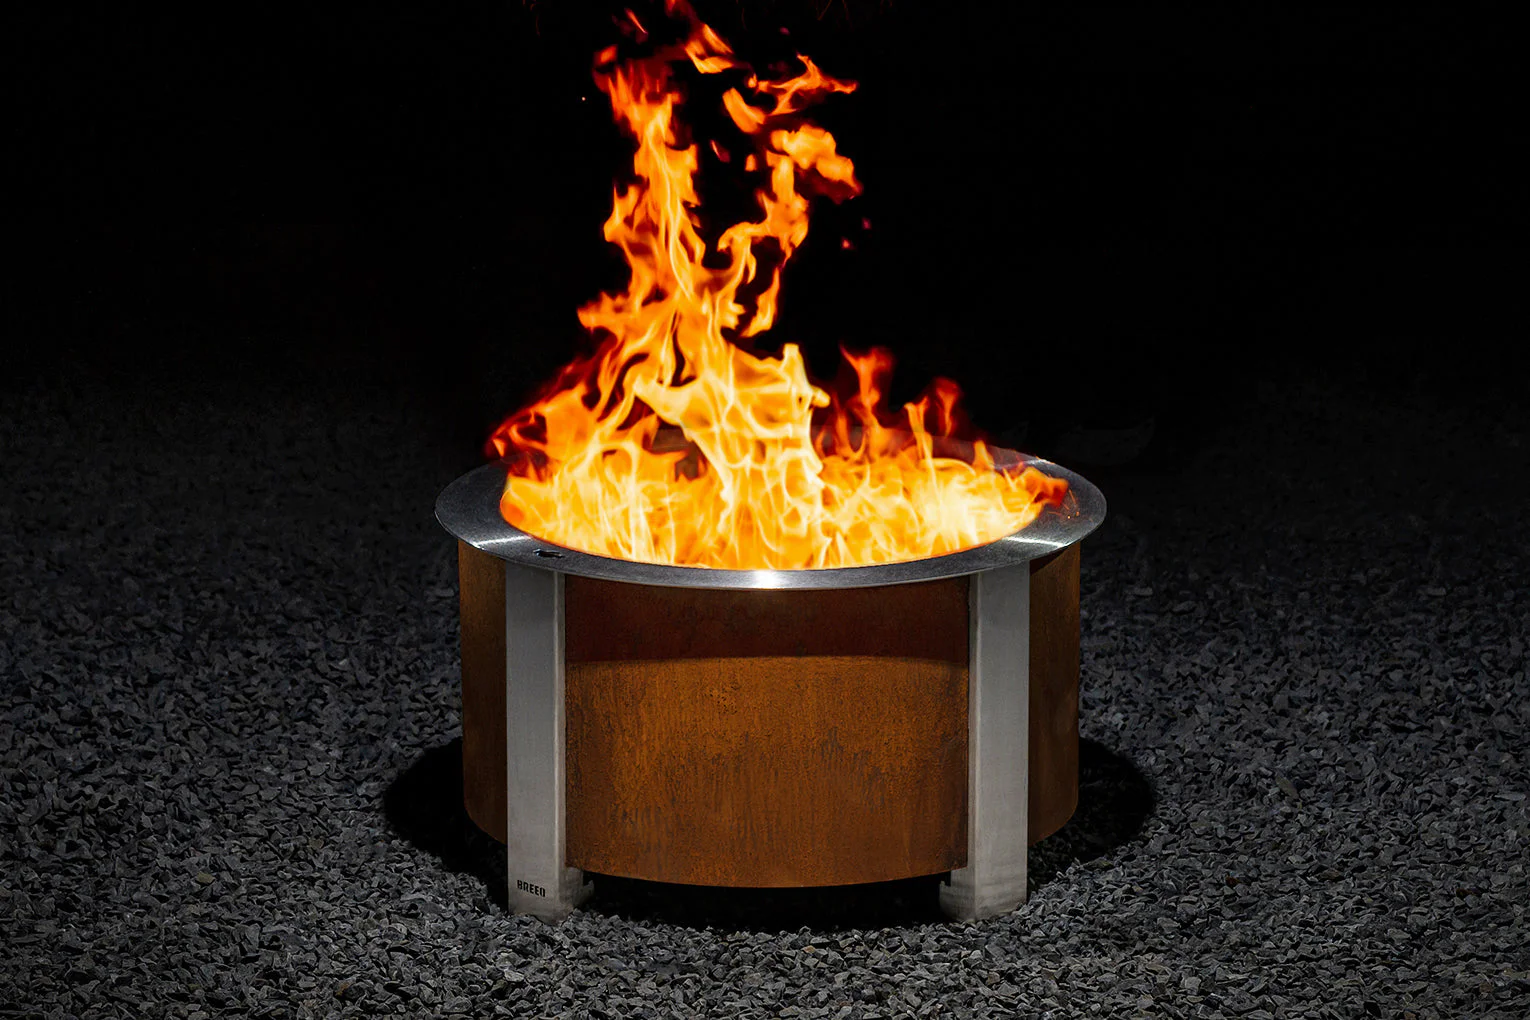 Picture of a Breeo Fire Pit being used. The flame is bright orange.